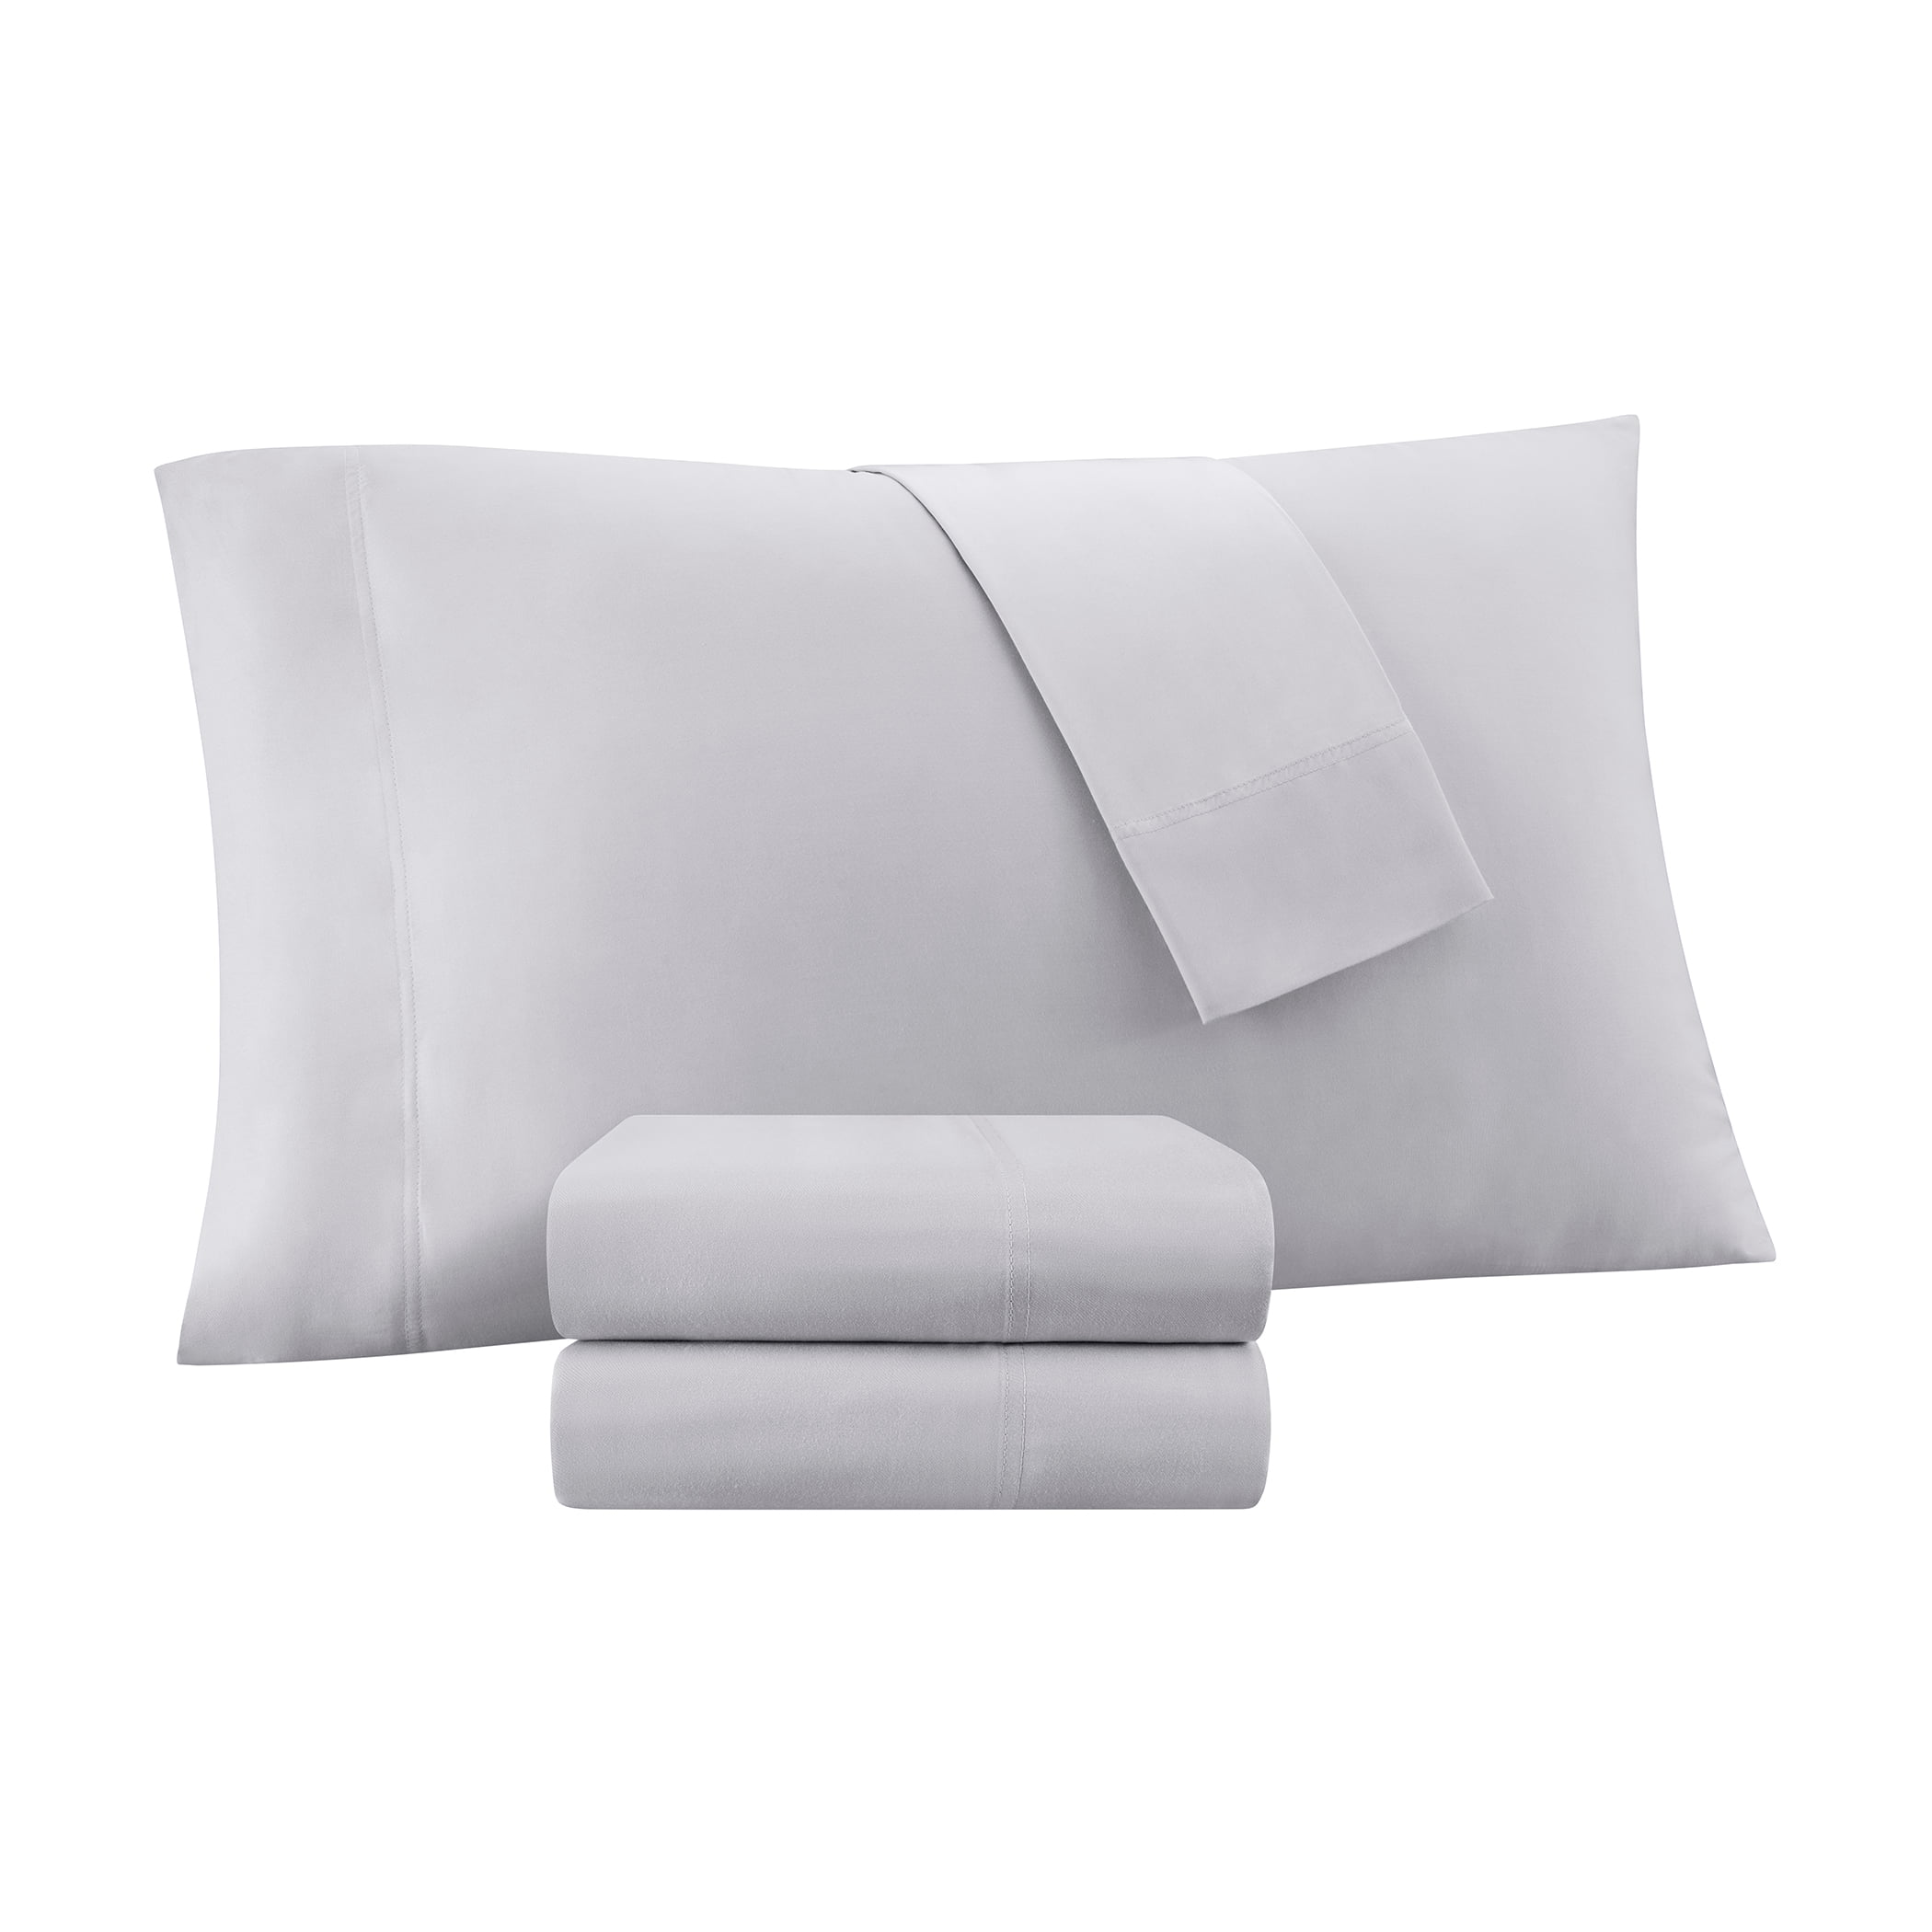 12 new white premium pillow cases standard/queen 20x32 american made T250 series 